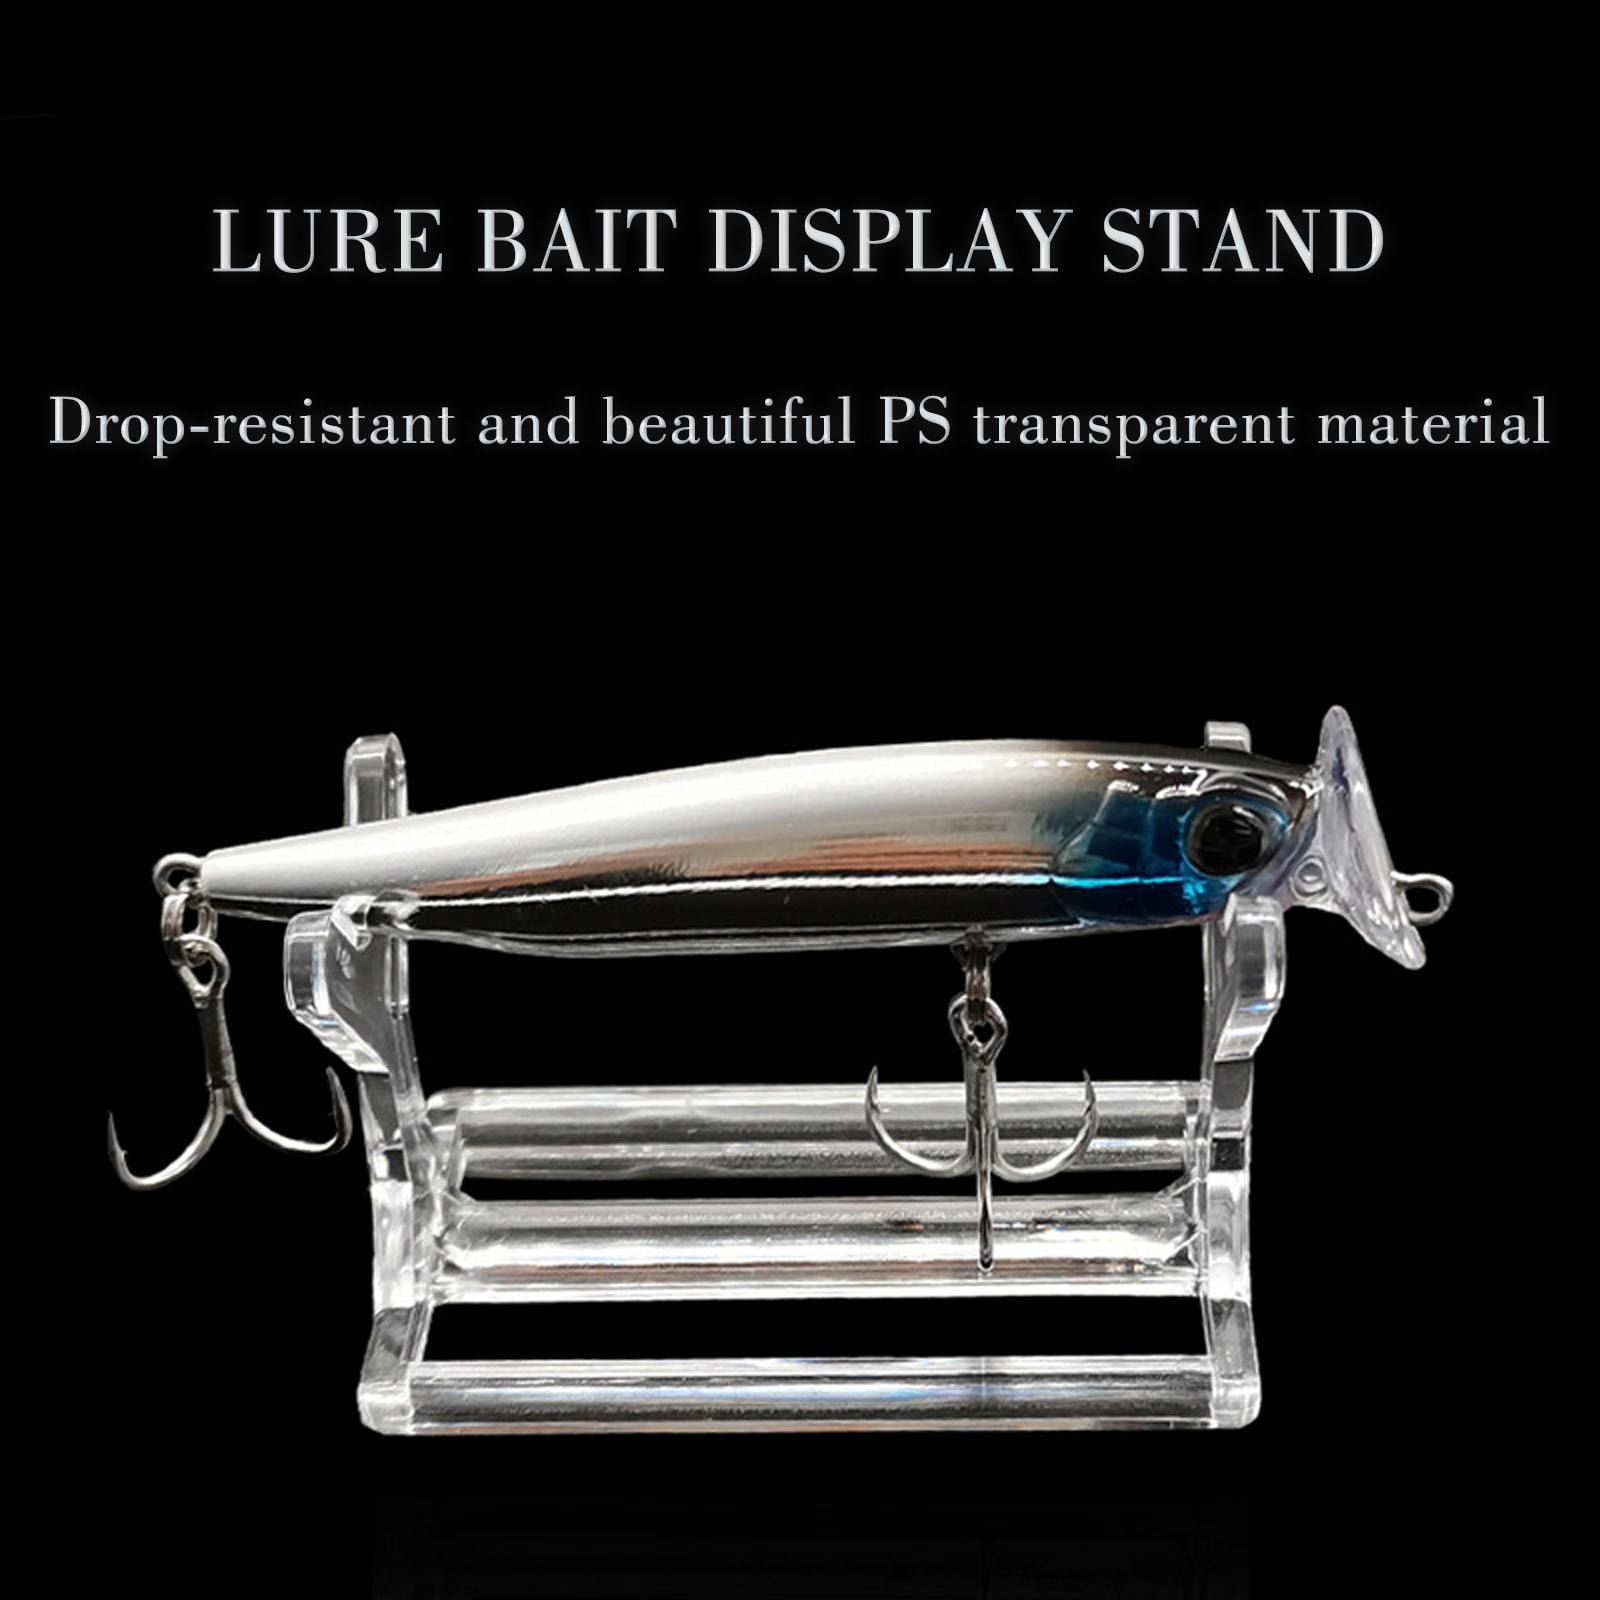 EIRZNGXQ Acrylic Fishing Lure Display Stands - Decorative Bait Showing  Shelf Holder - Storage & Decoration for Fishing Store - Pack of 1/5/10 pcs  U7H4